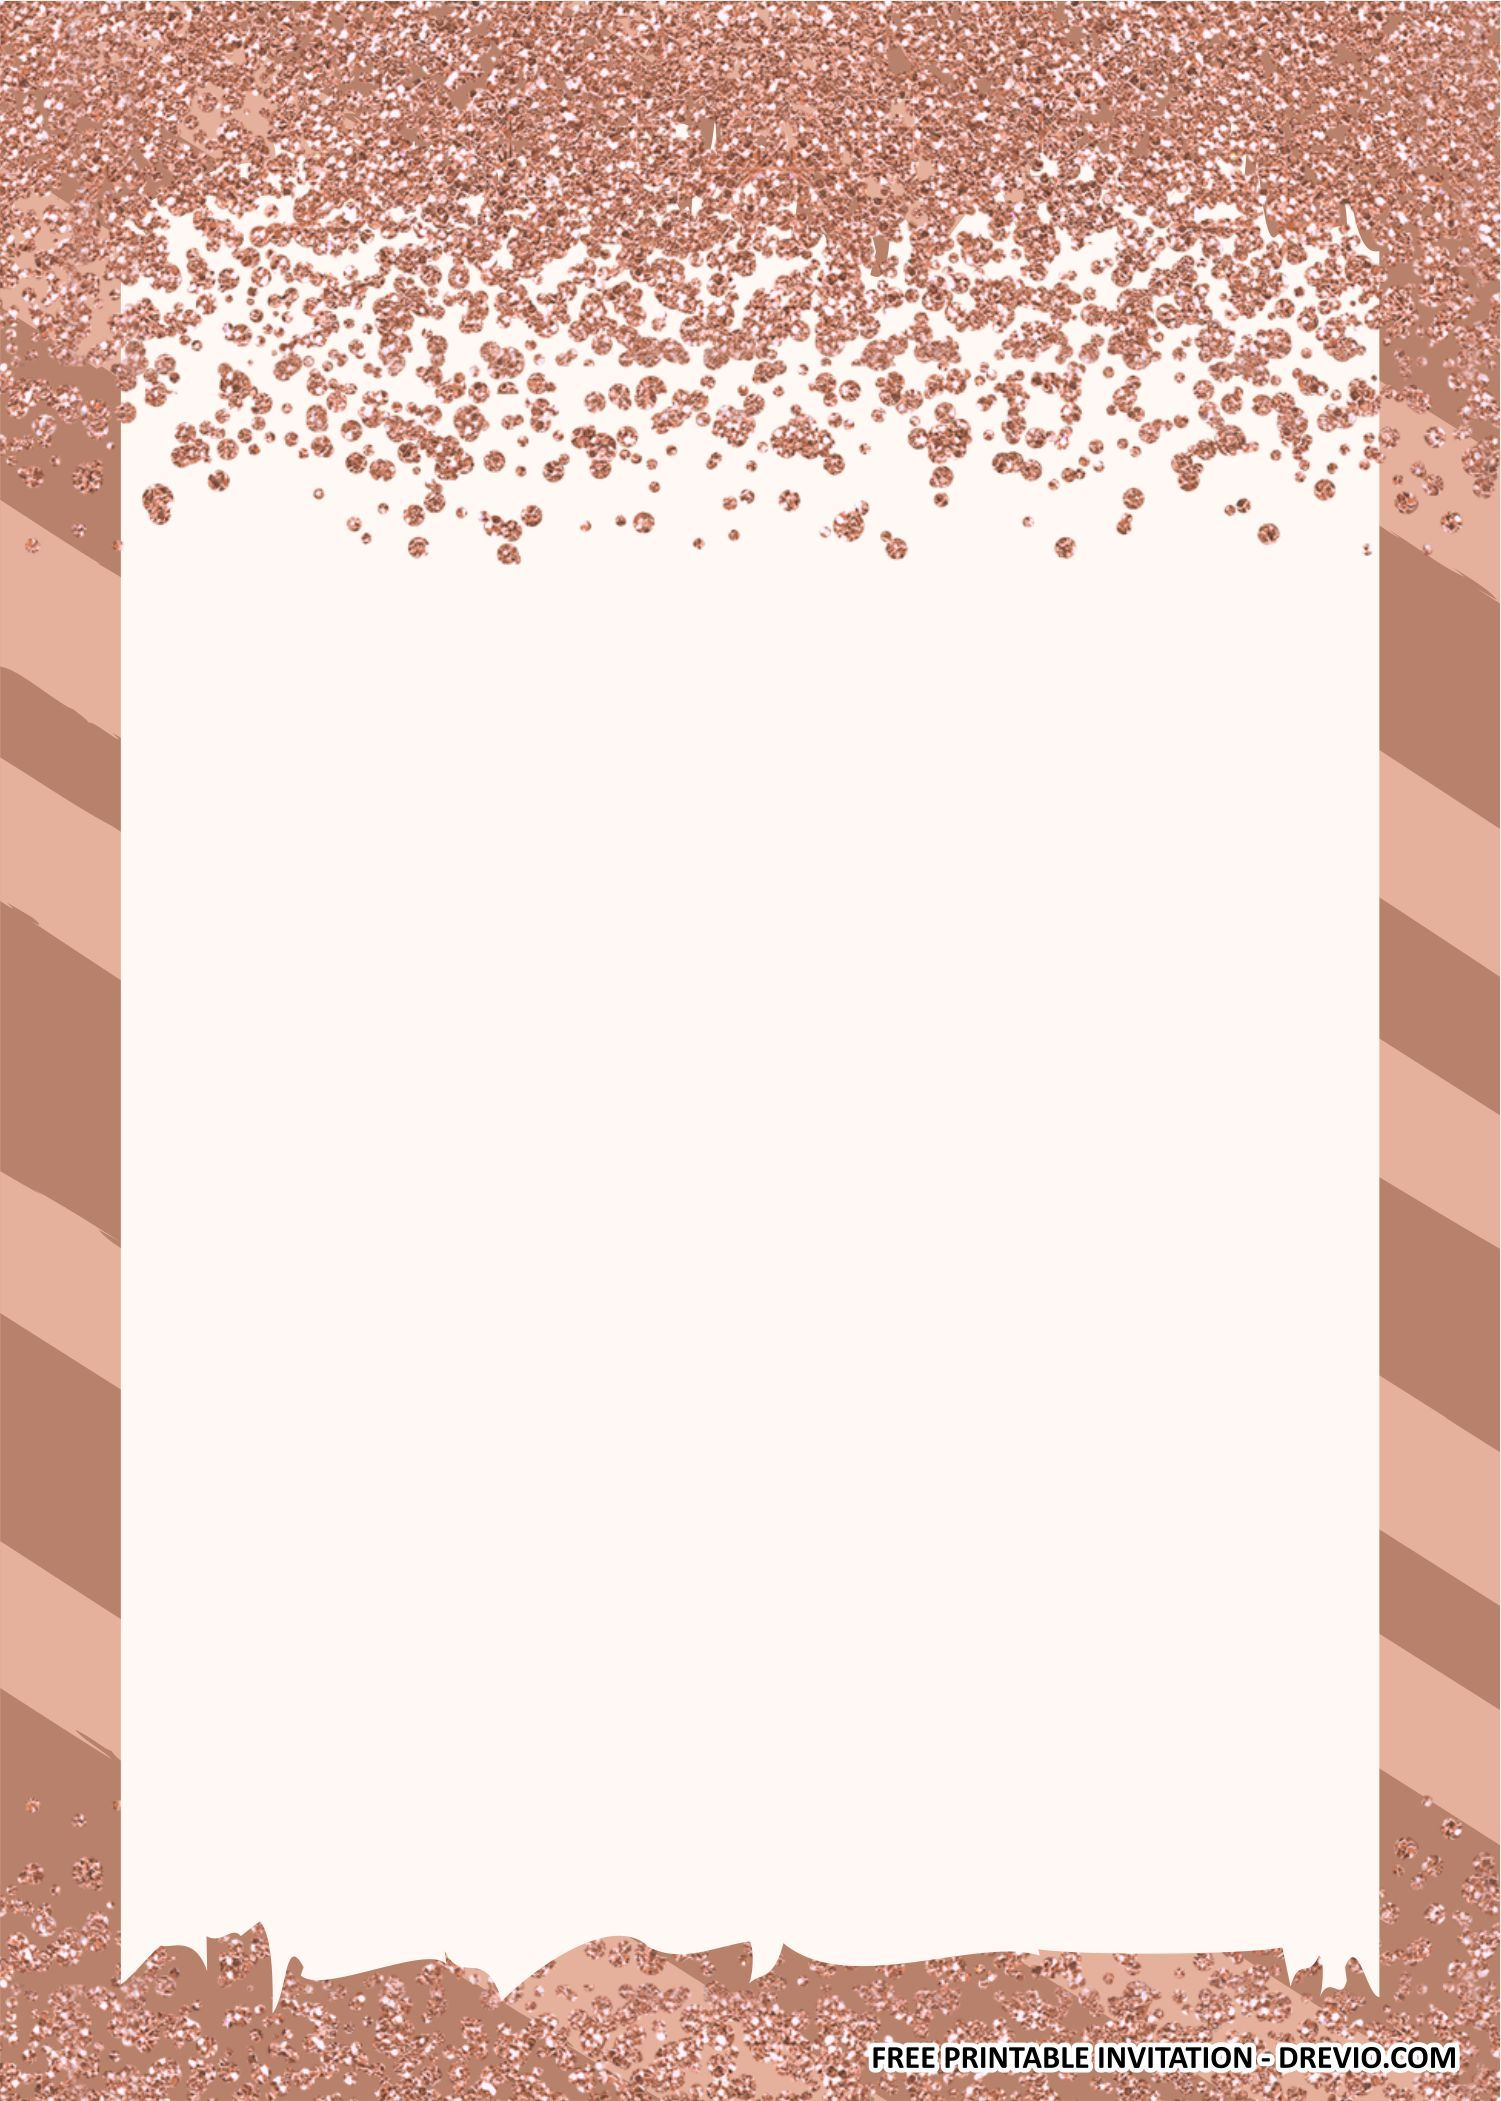  FREE PRINTABLE Rose Gold Confetti Birthday Party Kits Templates In 